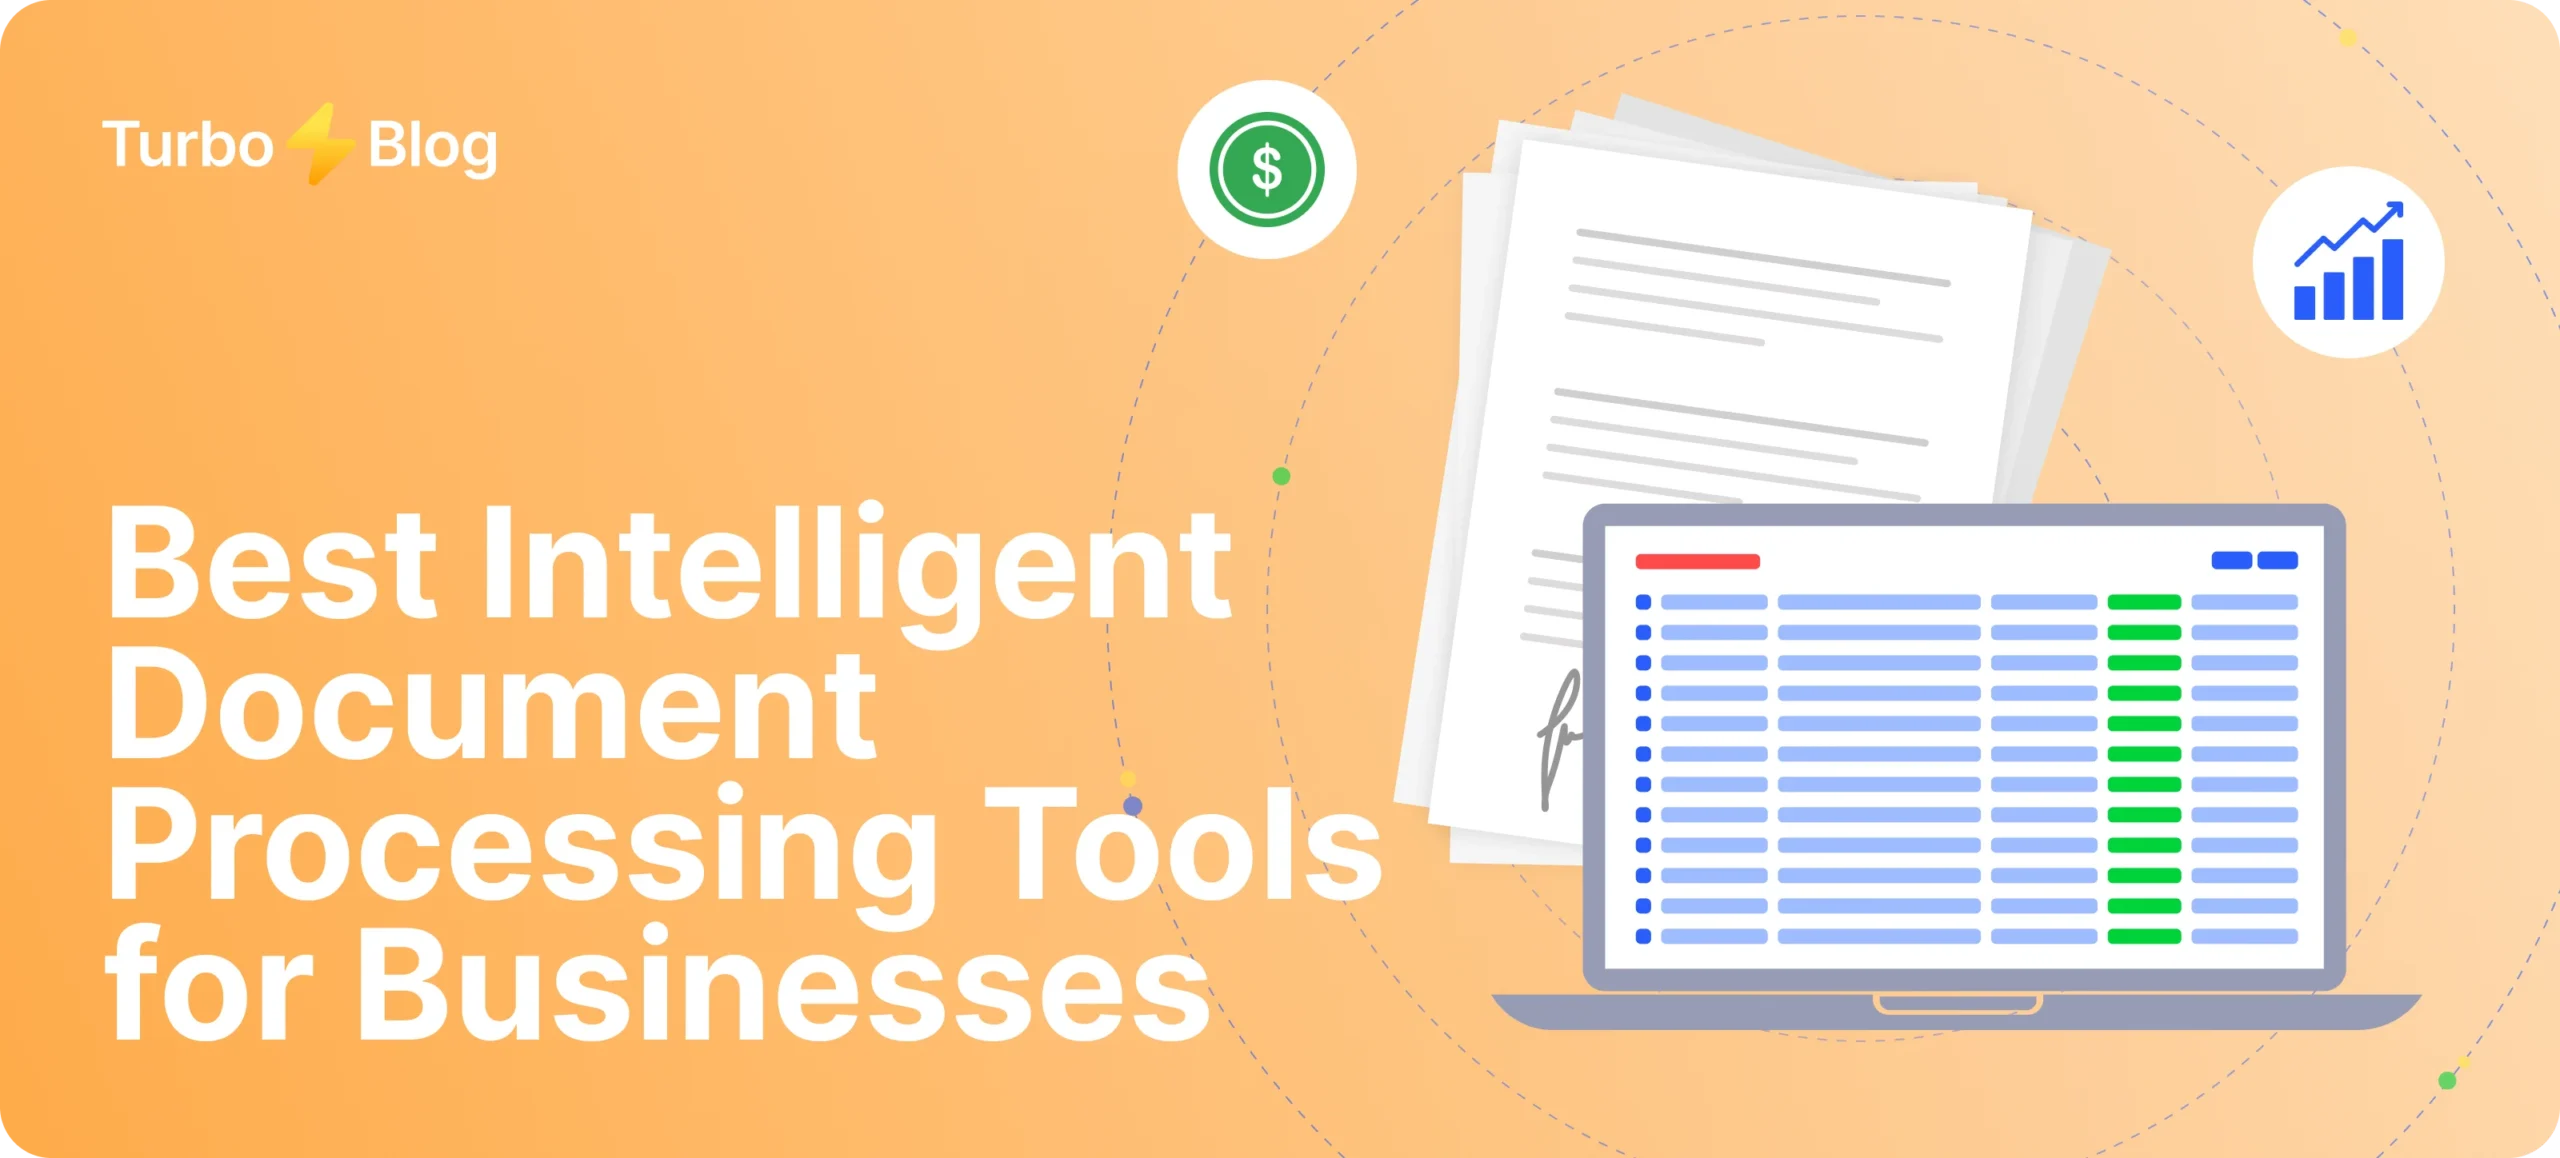 5 Best Intelligent Document Processing Tools for businesses